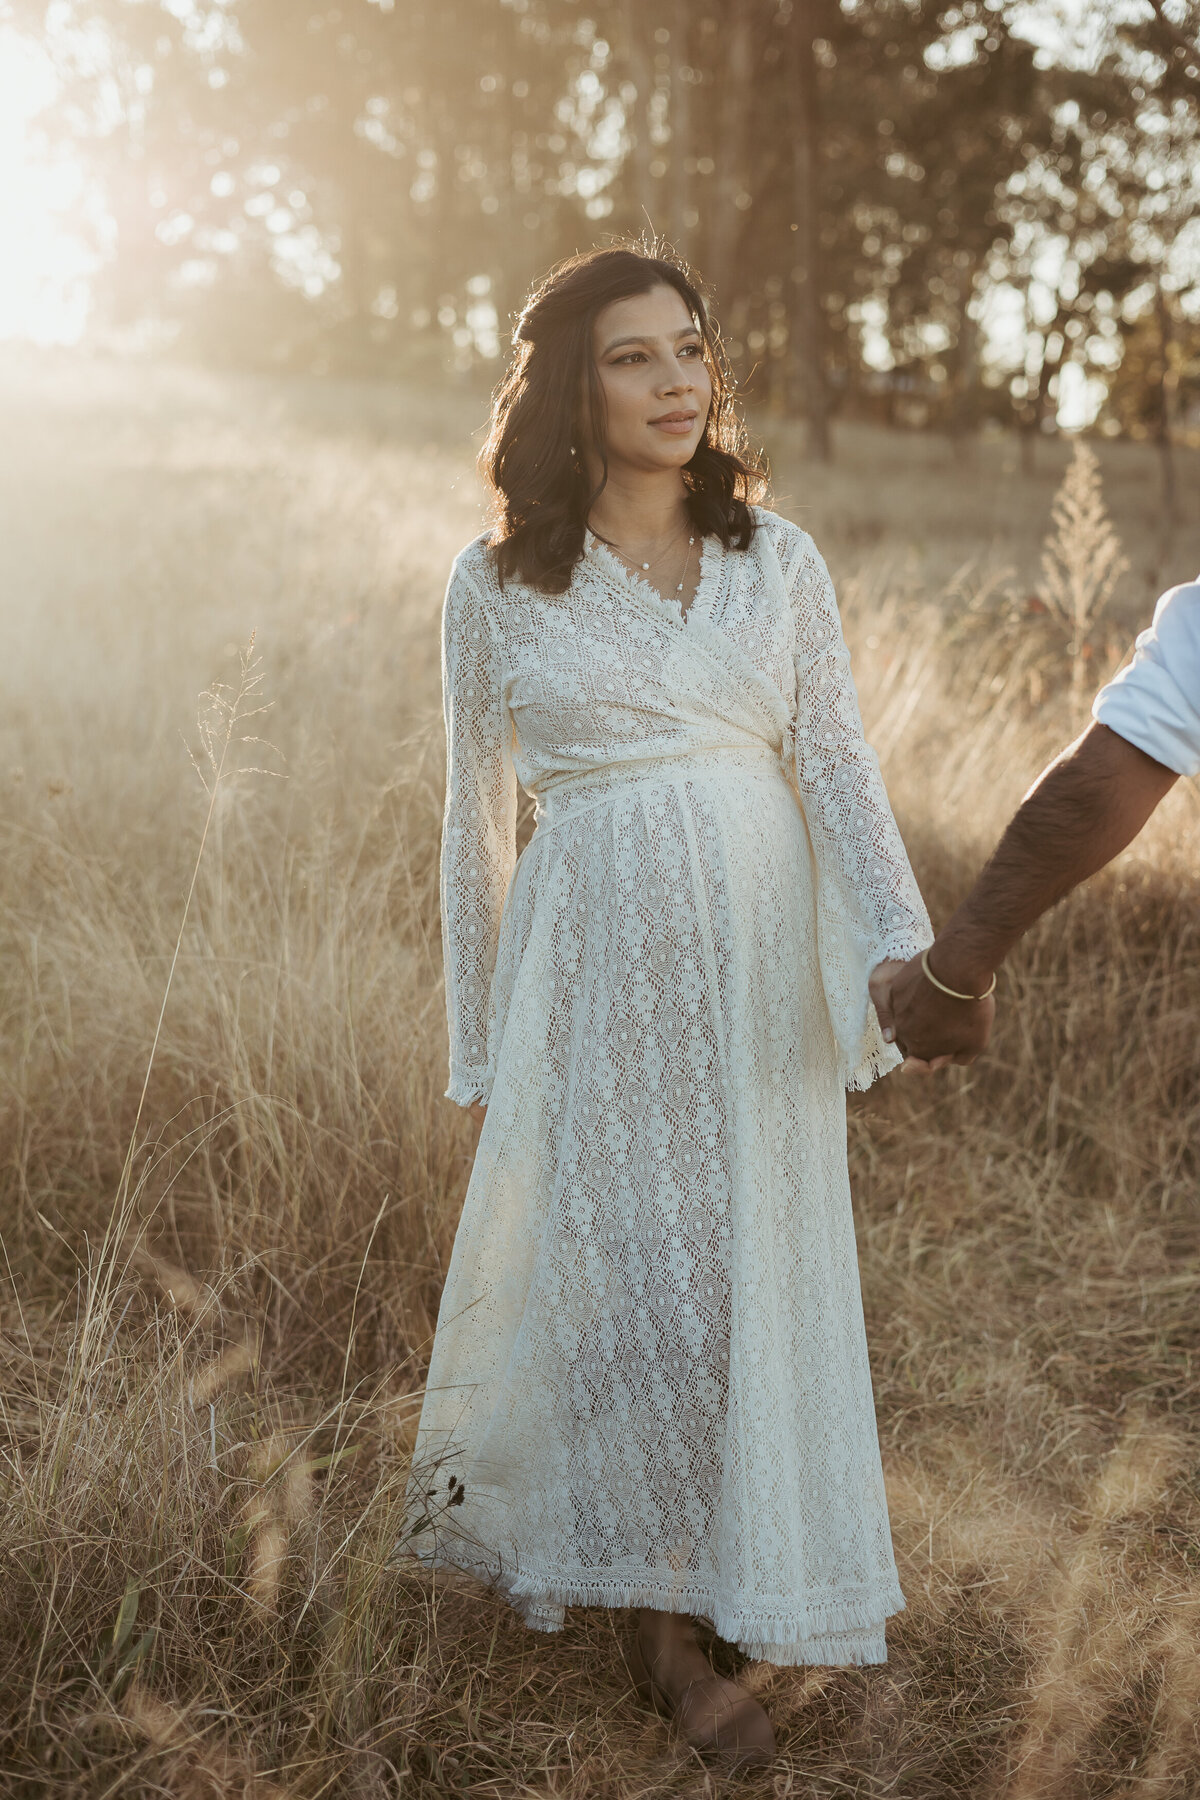 Mama wearing a white lace gown being led through a gorgeous field at sunset by her husband for their maternity photoshoot